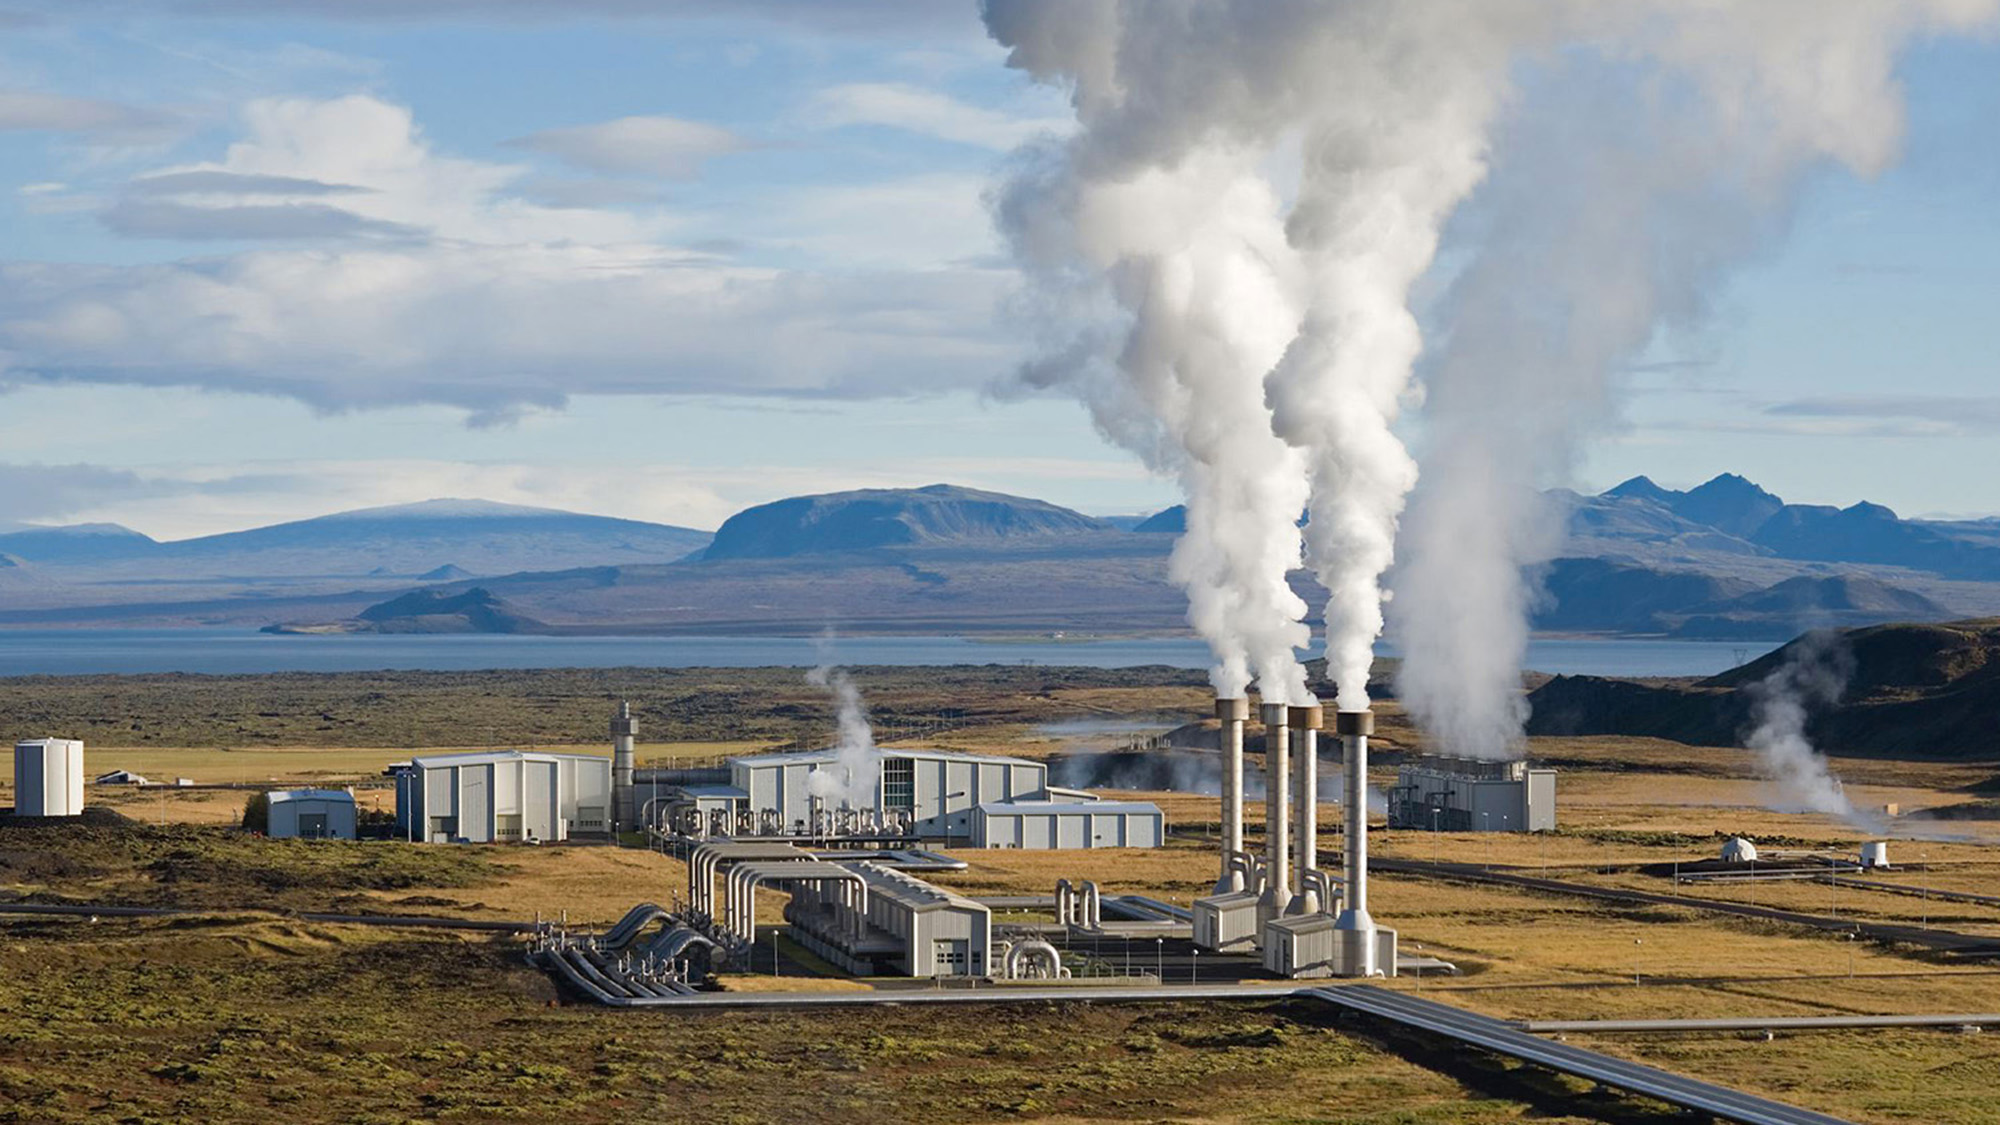 The Nesjavellir Geothermal Power Station. Geothermal power has long been popular in volcanic countries like Iceland, where hot water bubbles from the ground.